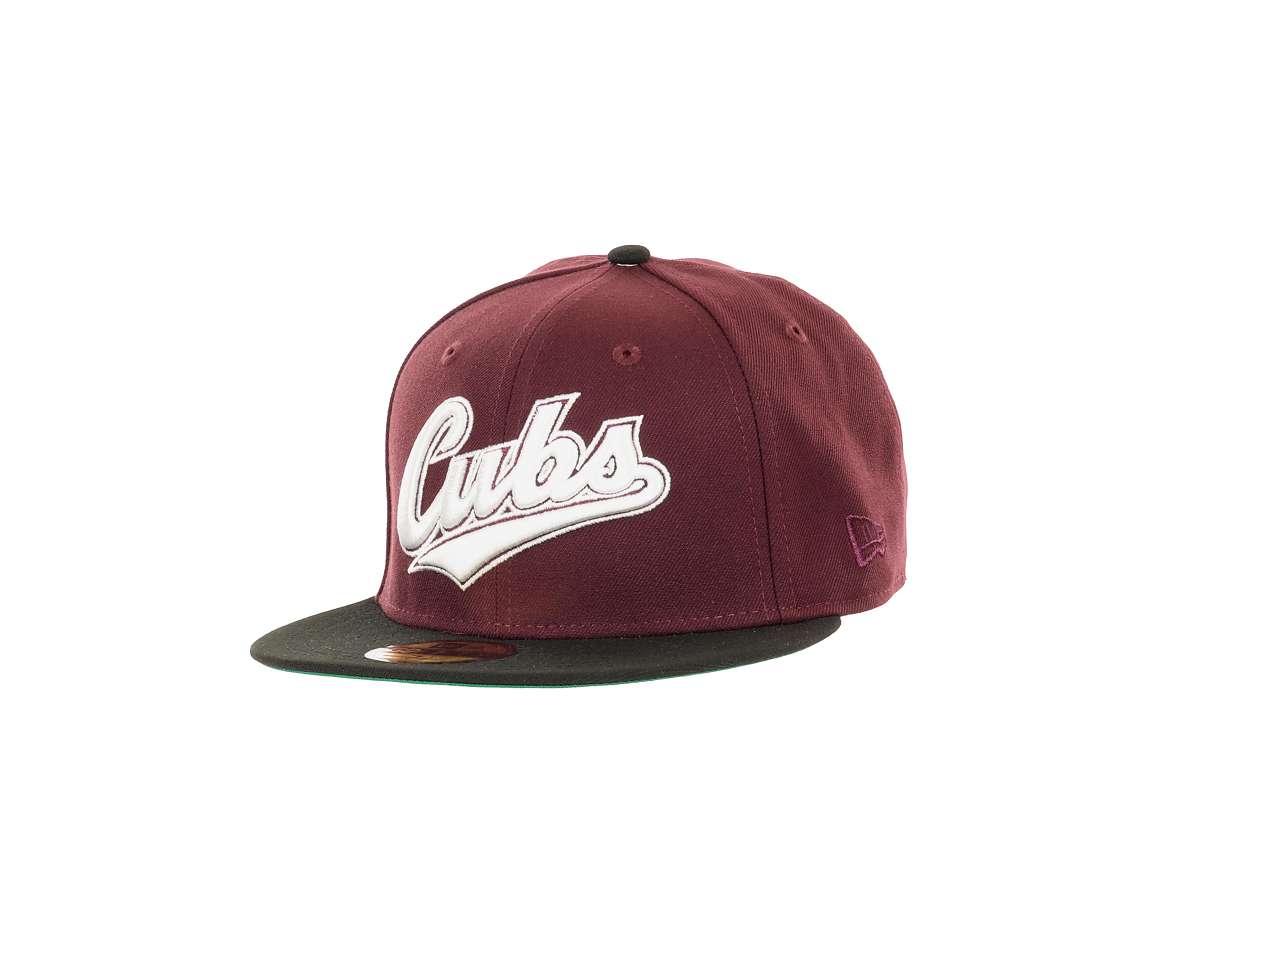 Chicago Cubs MLB Sidepatch Wrigley Field 100 Years Maroon Black 59Fifty Basecap New Era